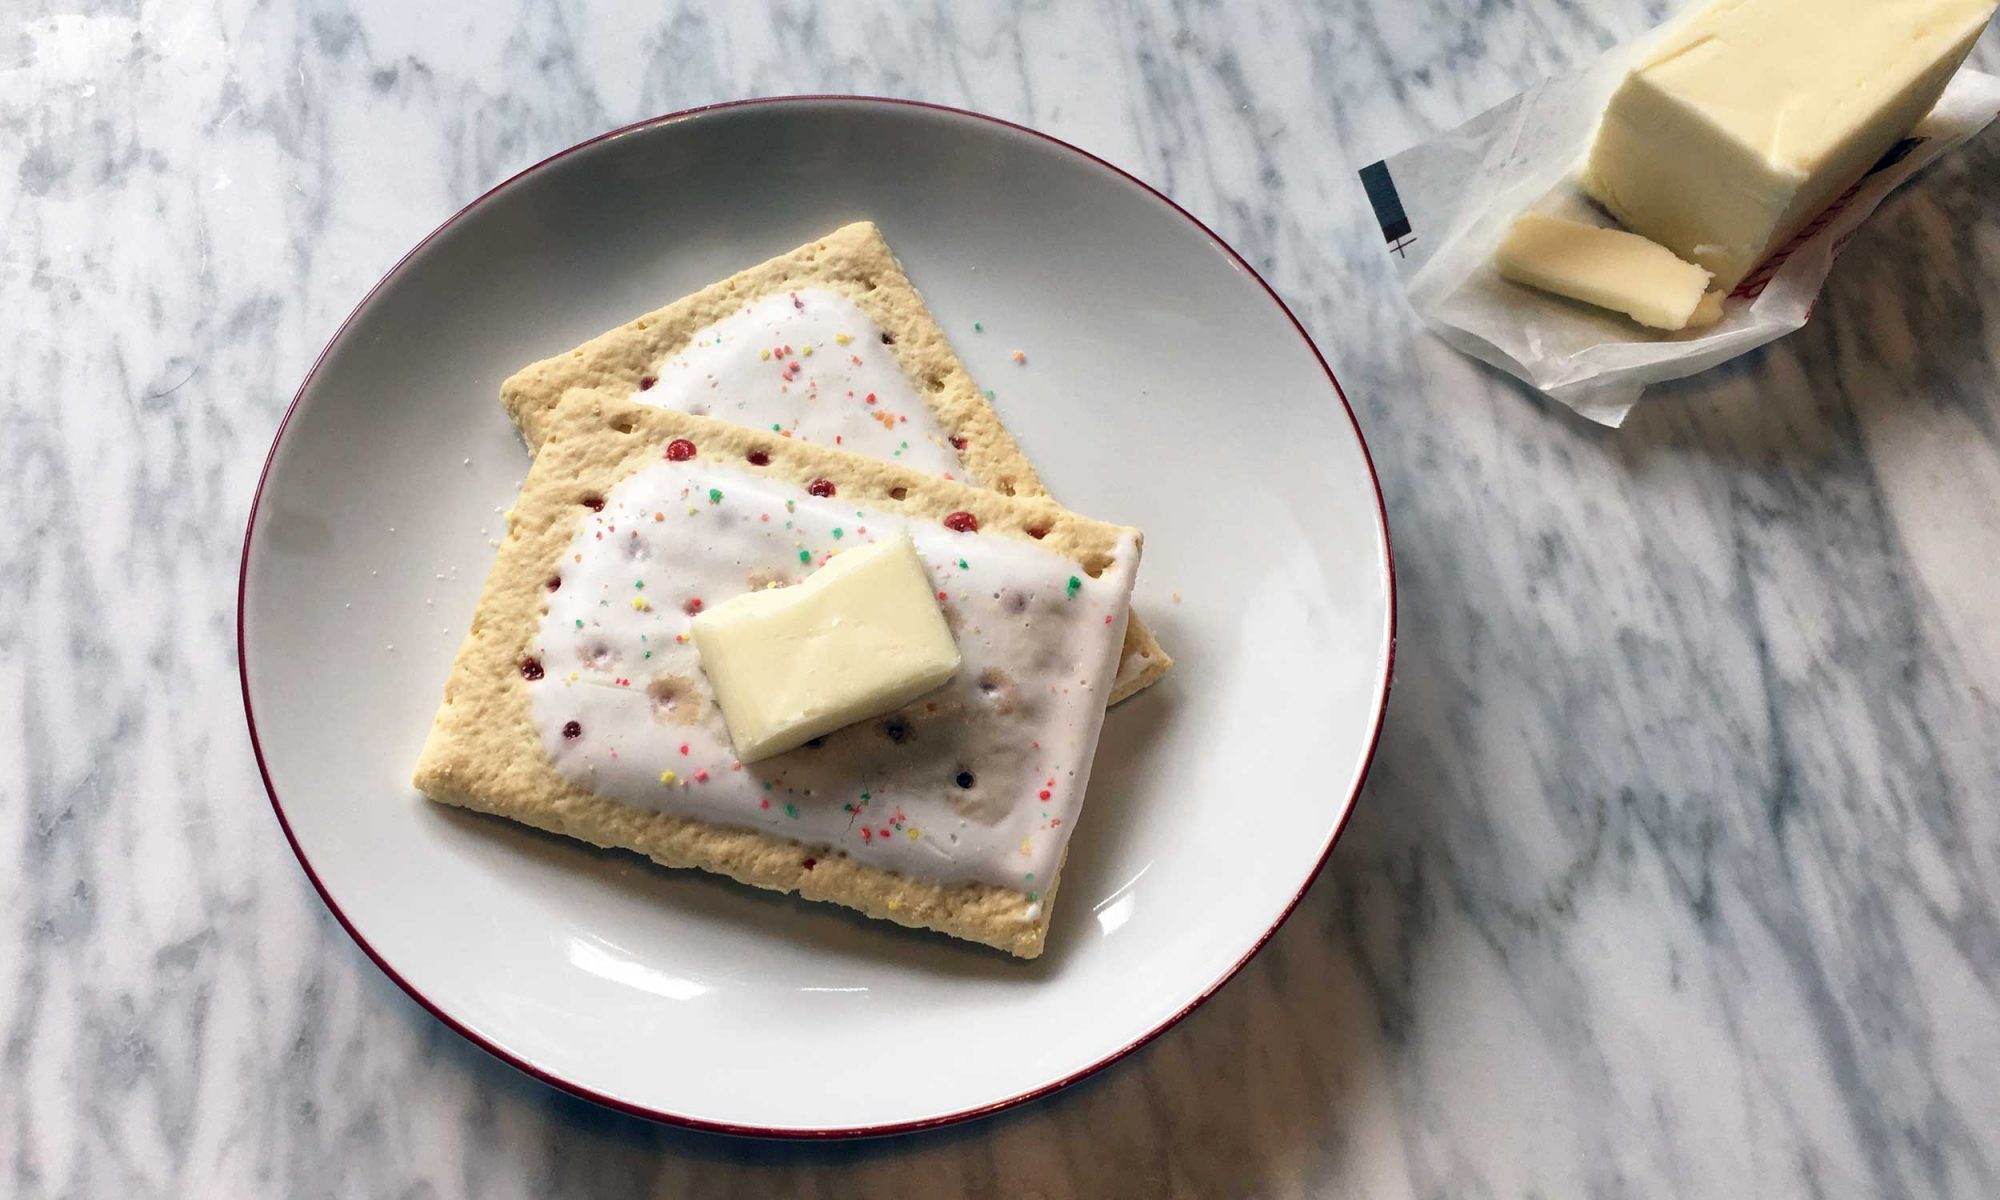 EC: Someone Called the Police Over This Pop-Tart Sandwich